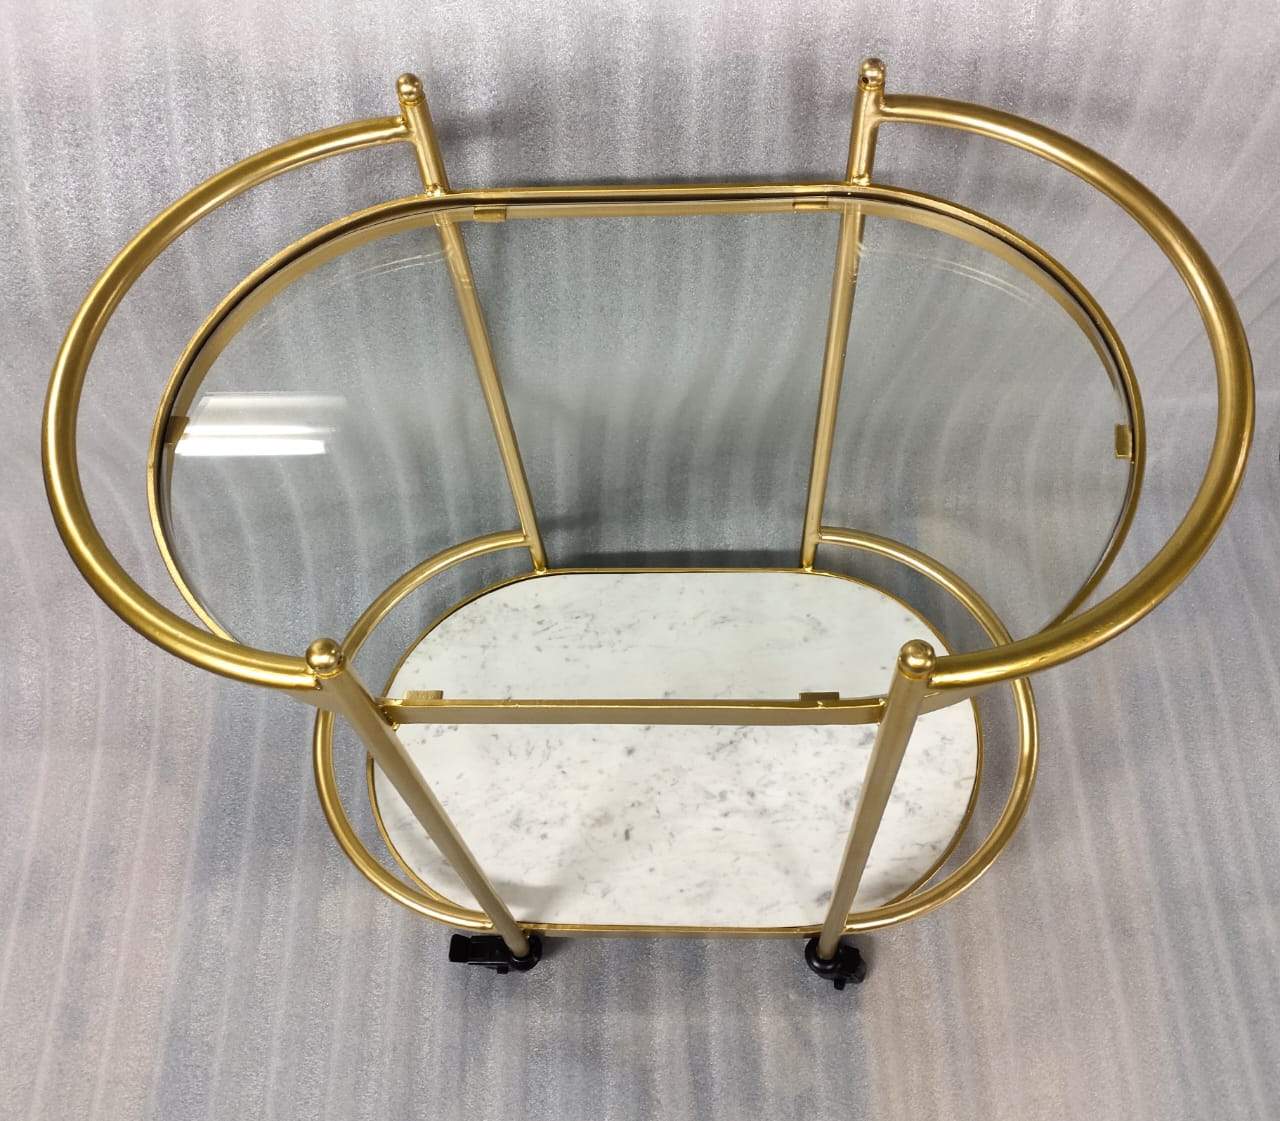 Iron Trolly with Marble Bottom, Gold and White